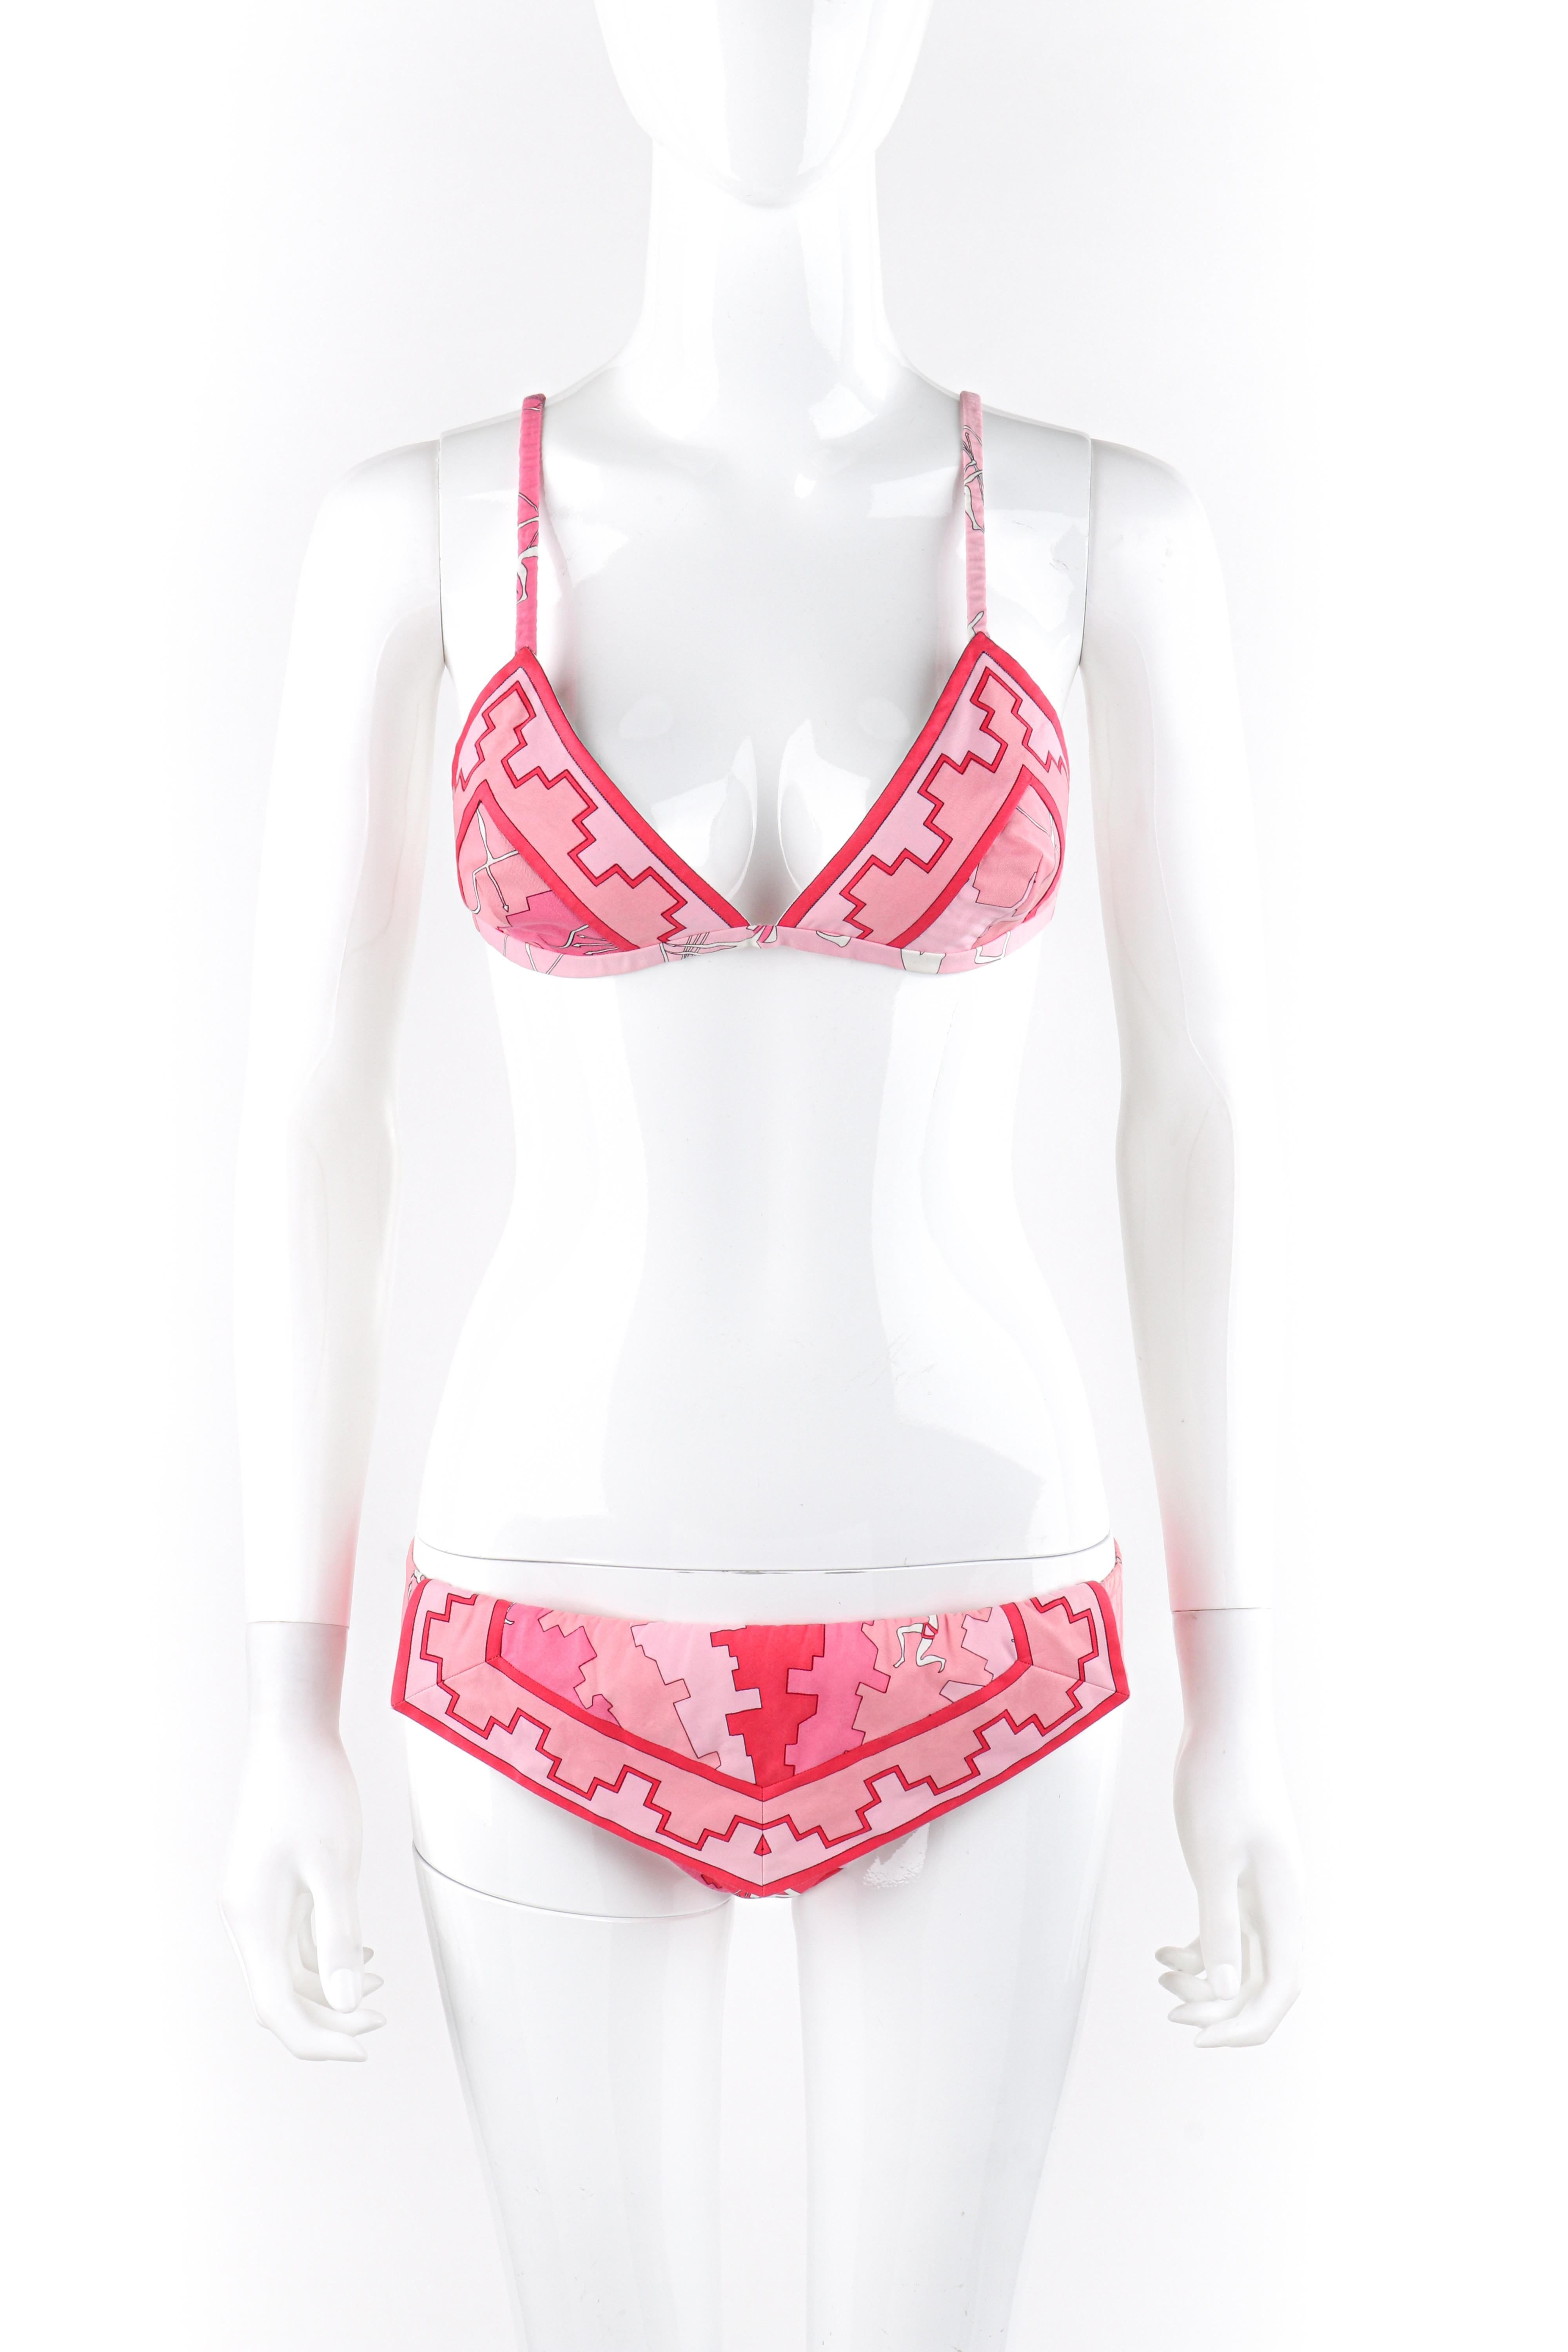 EMILIO PUCCI c.1970s Pink Geometric Novelty Figure 2 Pc Triangle Bikini Swimsuit
Circa: 1970s 
Label(s): Emilio Pucci, Exclusively for Saks Fifth Avenue
Designer: Emilio Pucci 
Style: Bikini
Color(s): Shades of pink, white, black
Lined: Yes
Marked